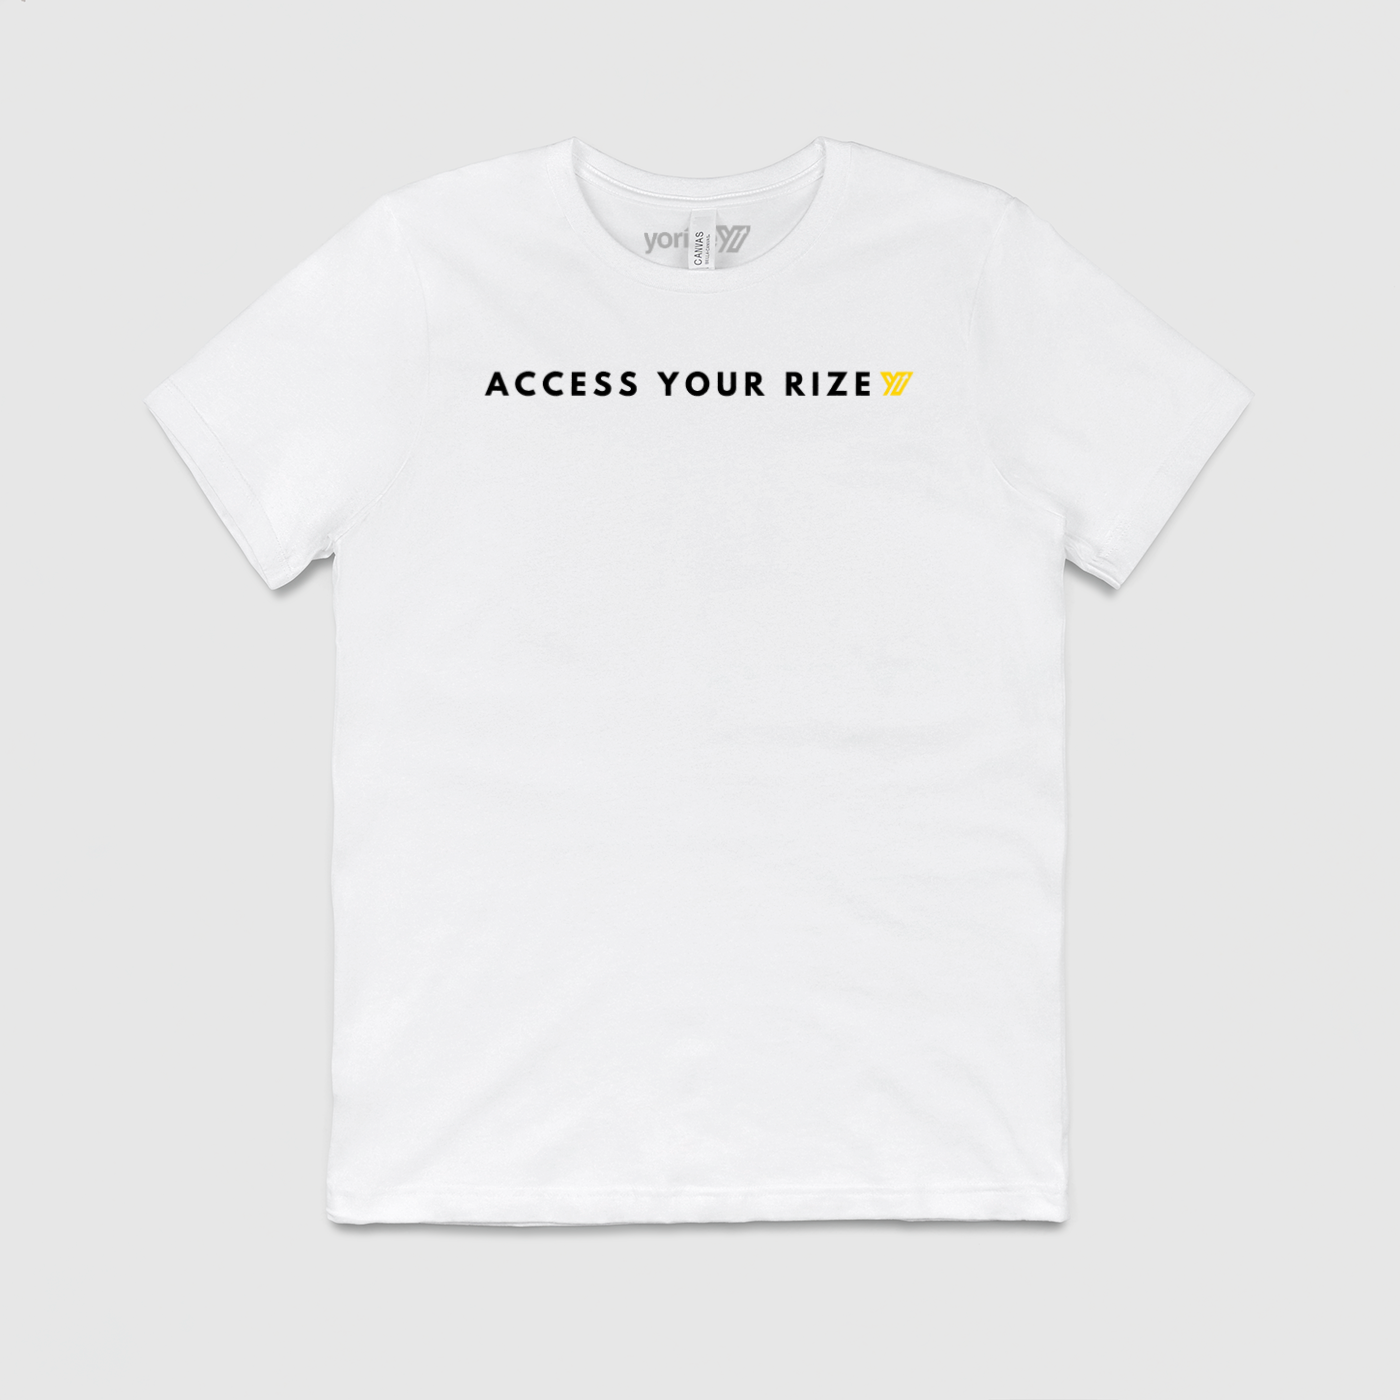 Access Your Rize Tee